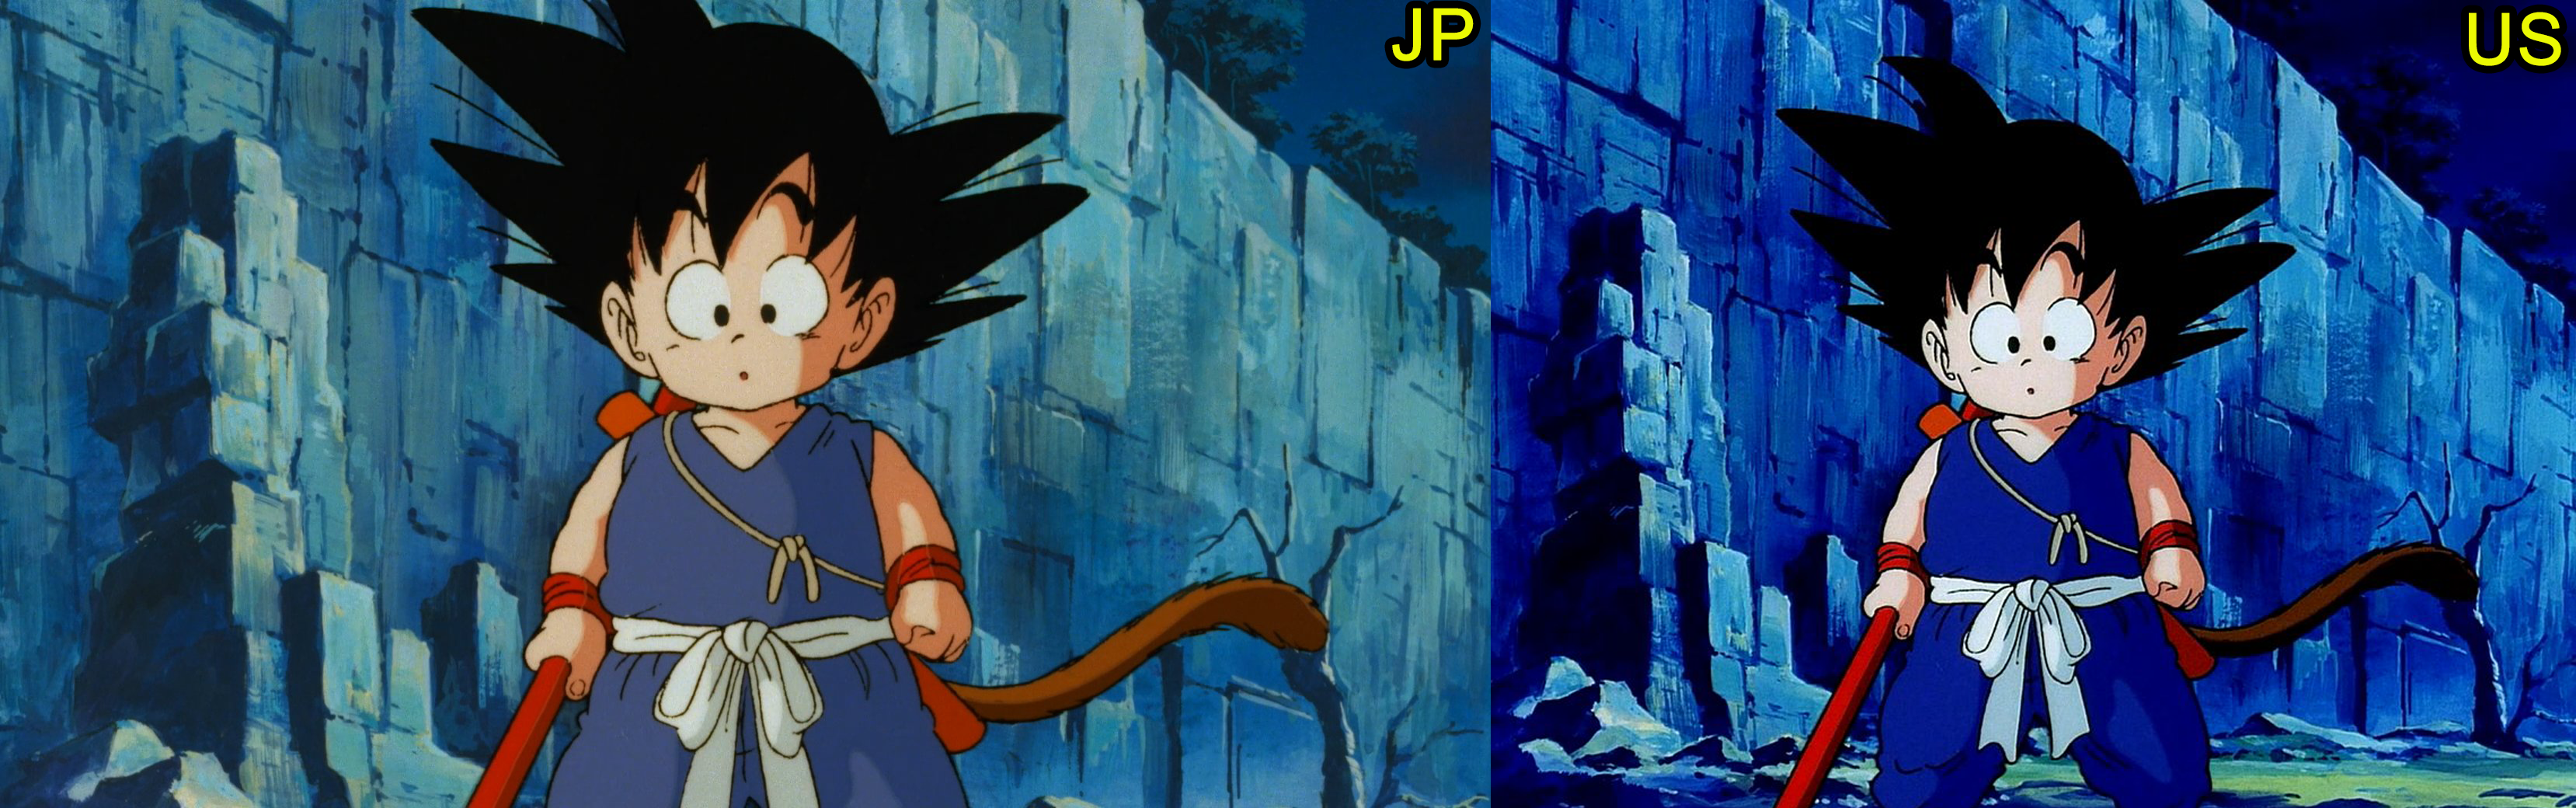 Dragon Ball Z Tree Of Might 720p Download